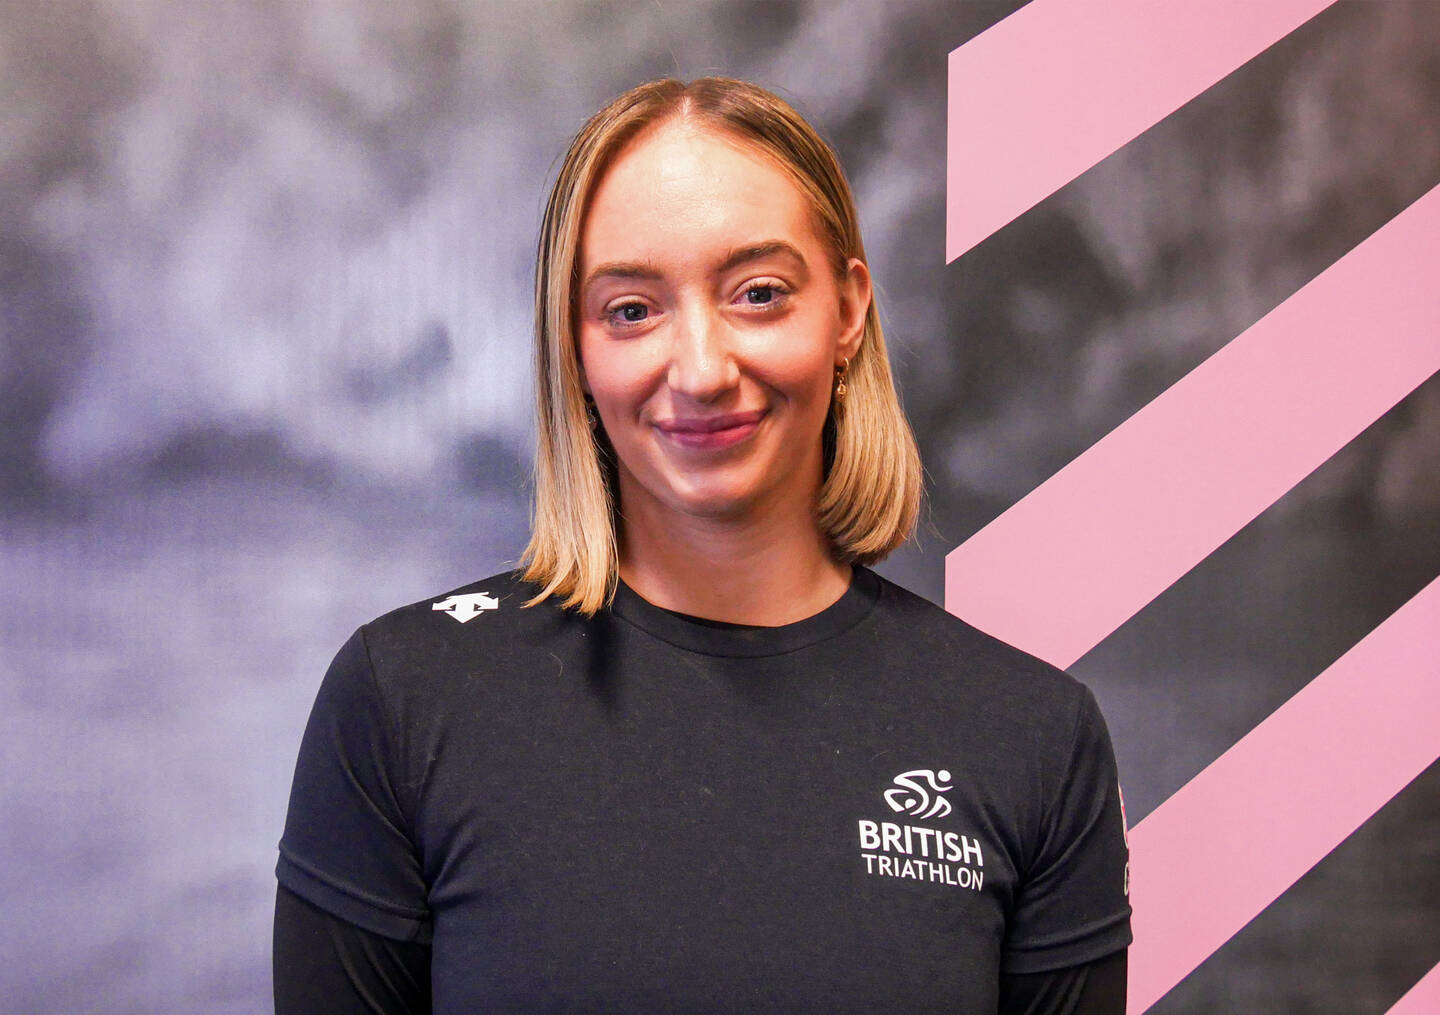 Amie Martin, Head of Equality, Diversity and Inclusion at British Triathlon